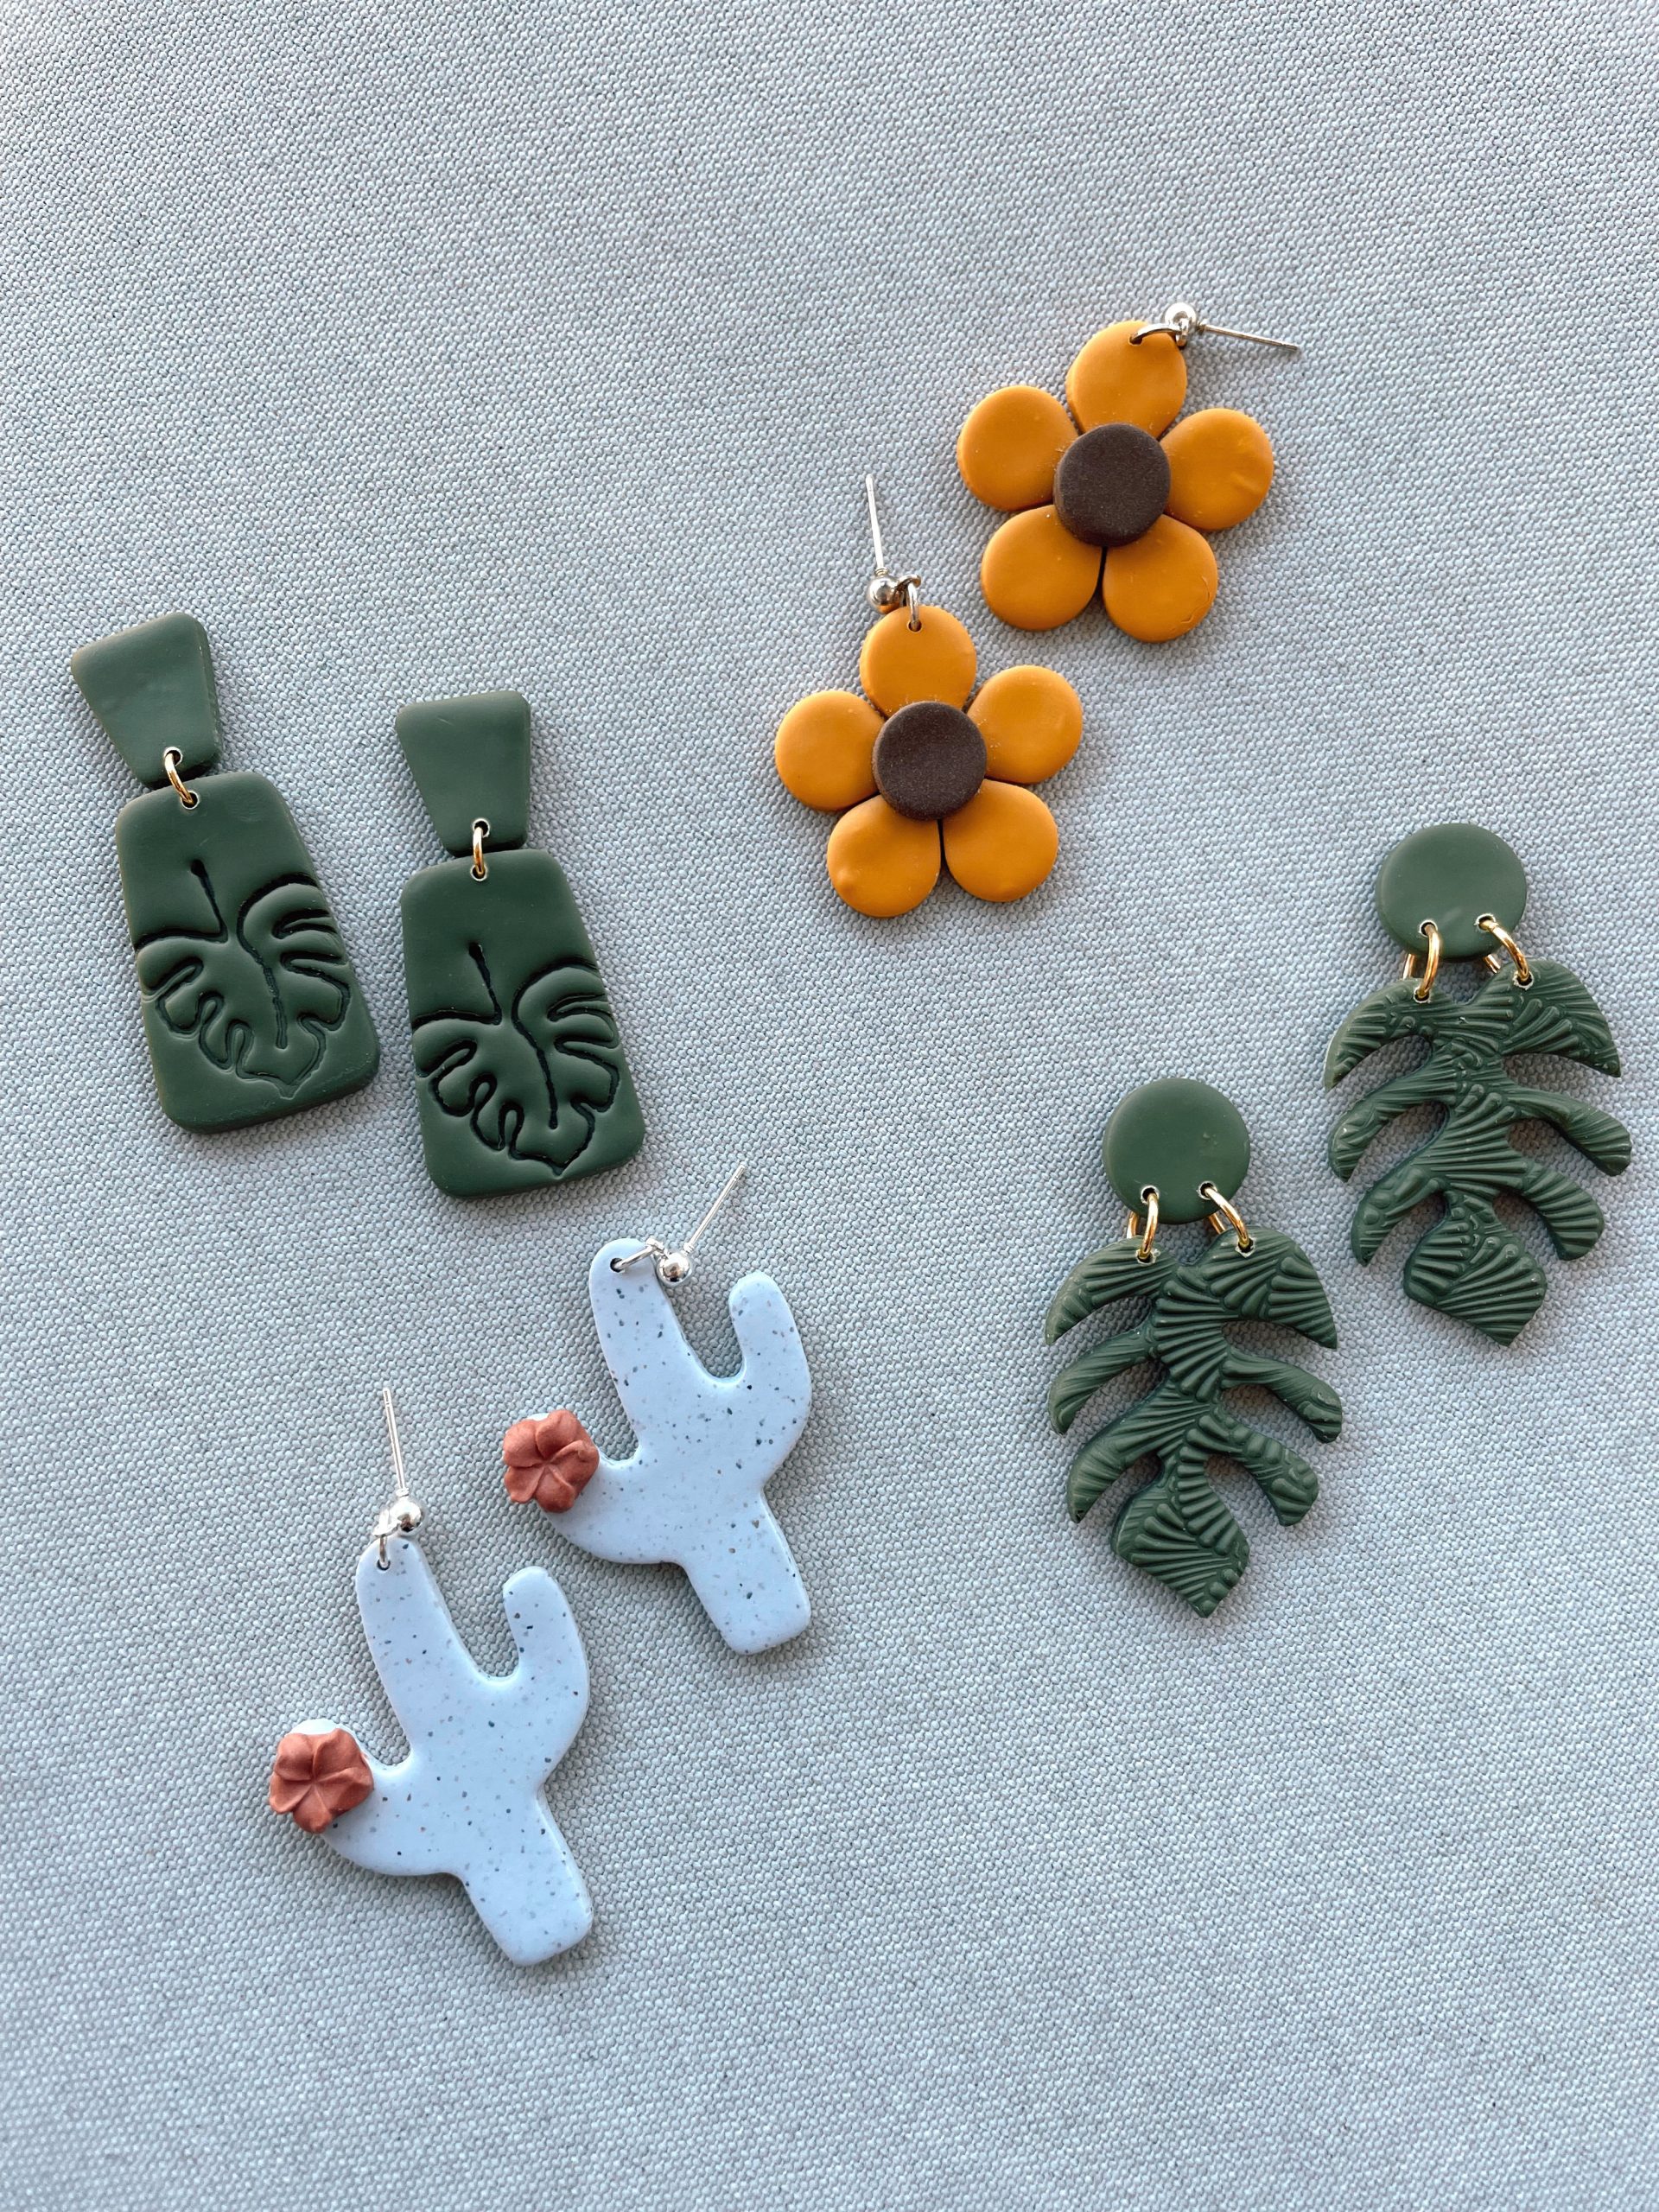 CANCELLED Holiday Clay Jewelry Workshop